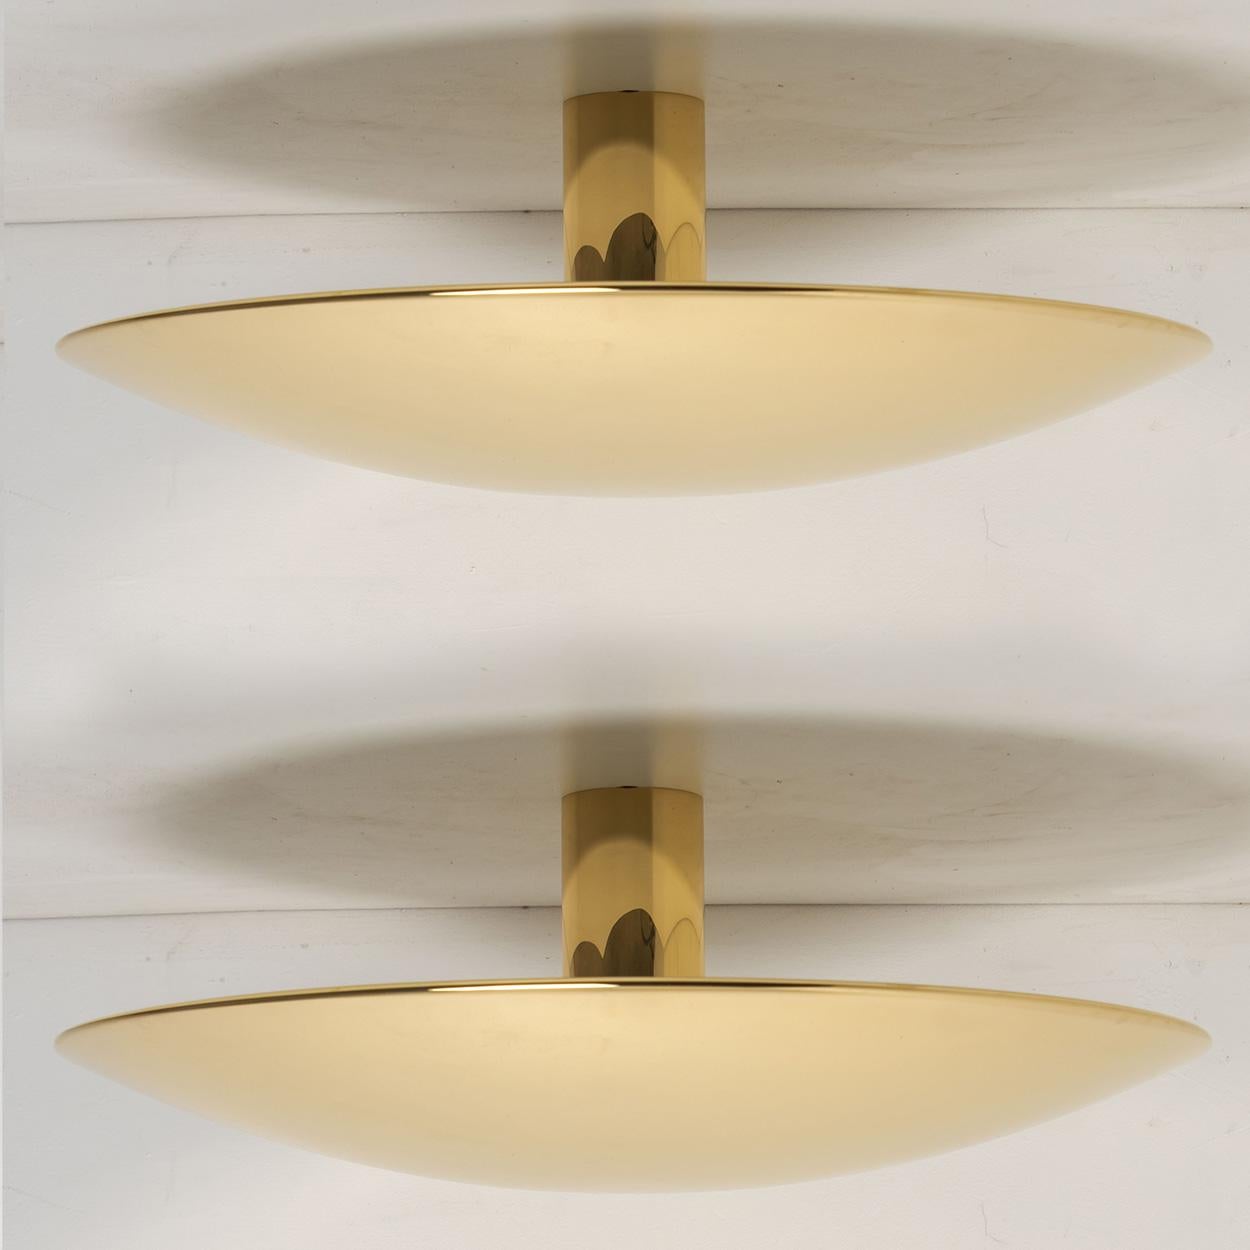 1 of the 2 Large Florian Schulz Brass Flushmount Ceiling /Wall Lights, 1970 For Sale 2